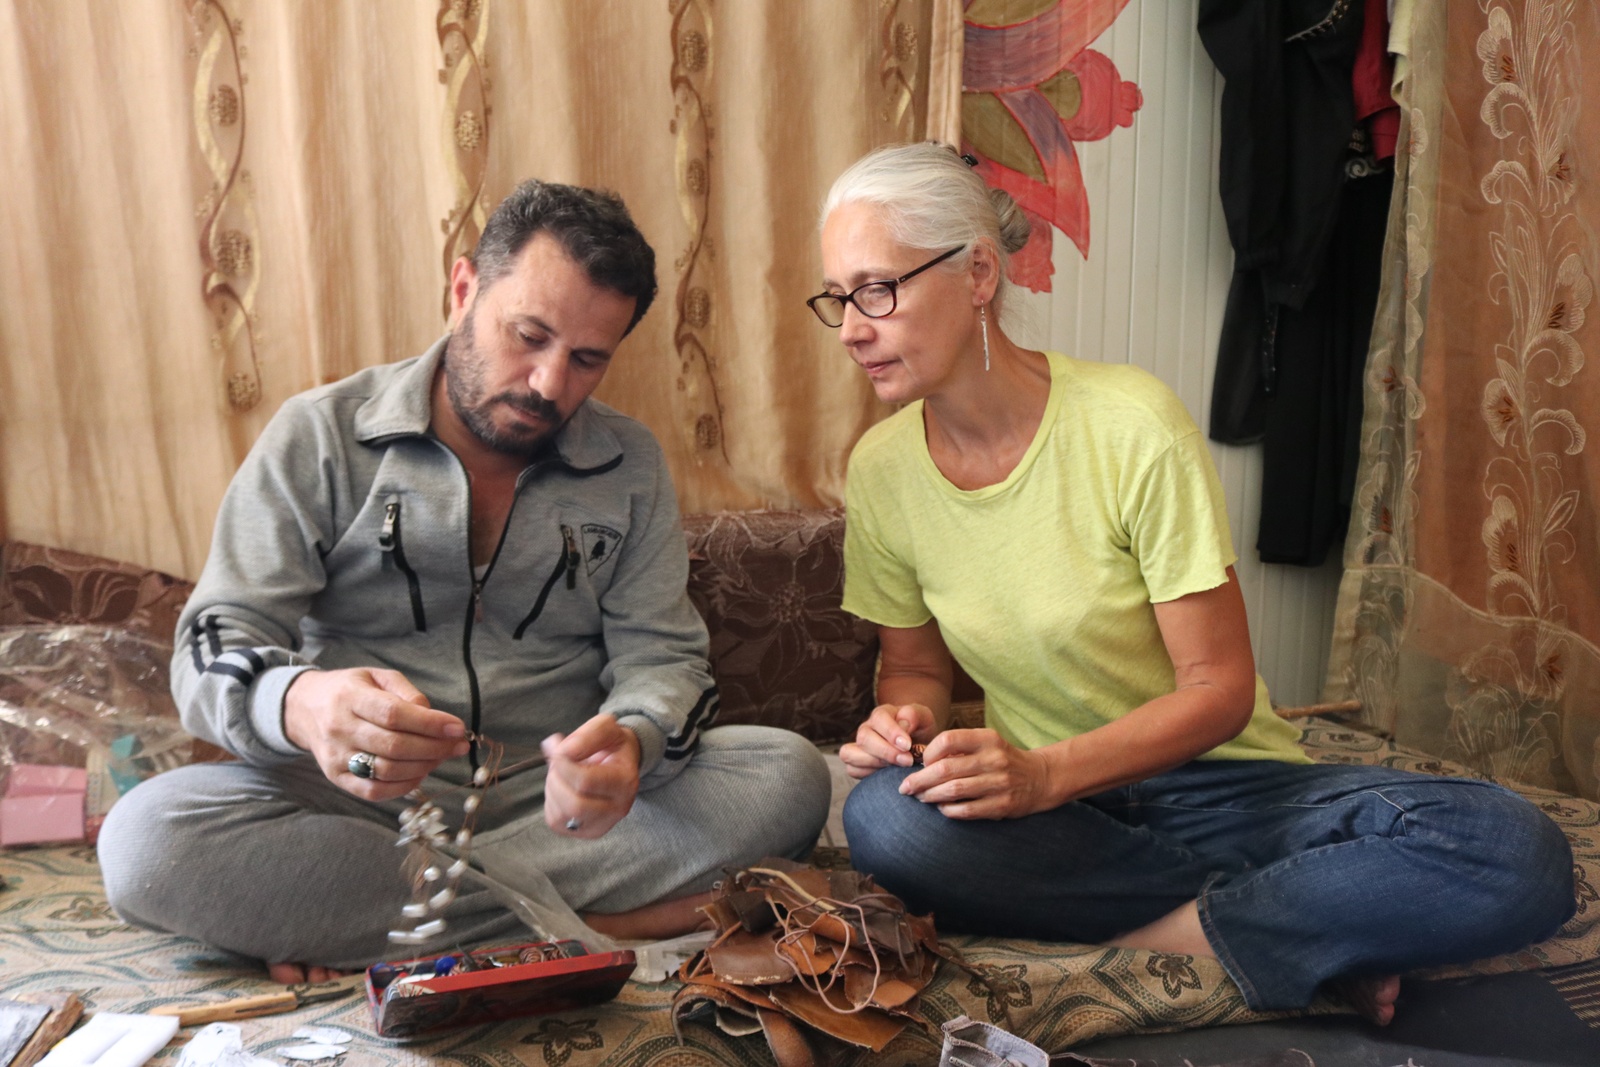 Hamden's talent was spotted by social artist and designer Professor Helen Storey MBE in her role as Za'atari camp's Artist in Residence